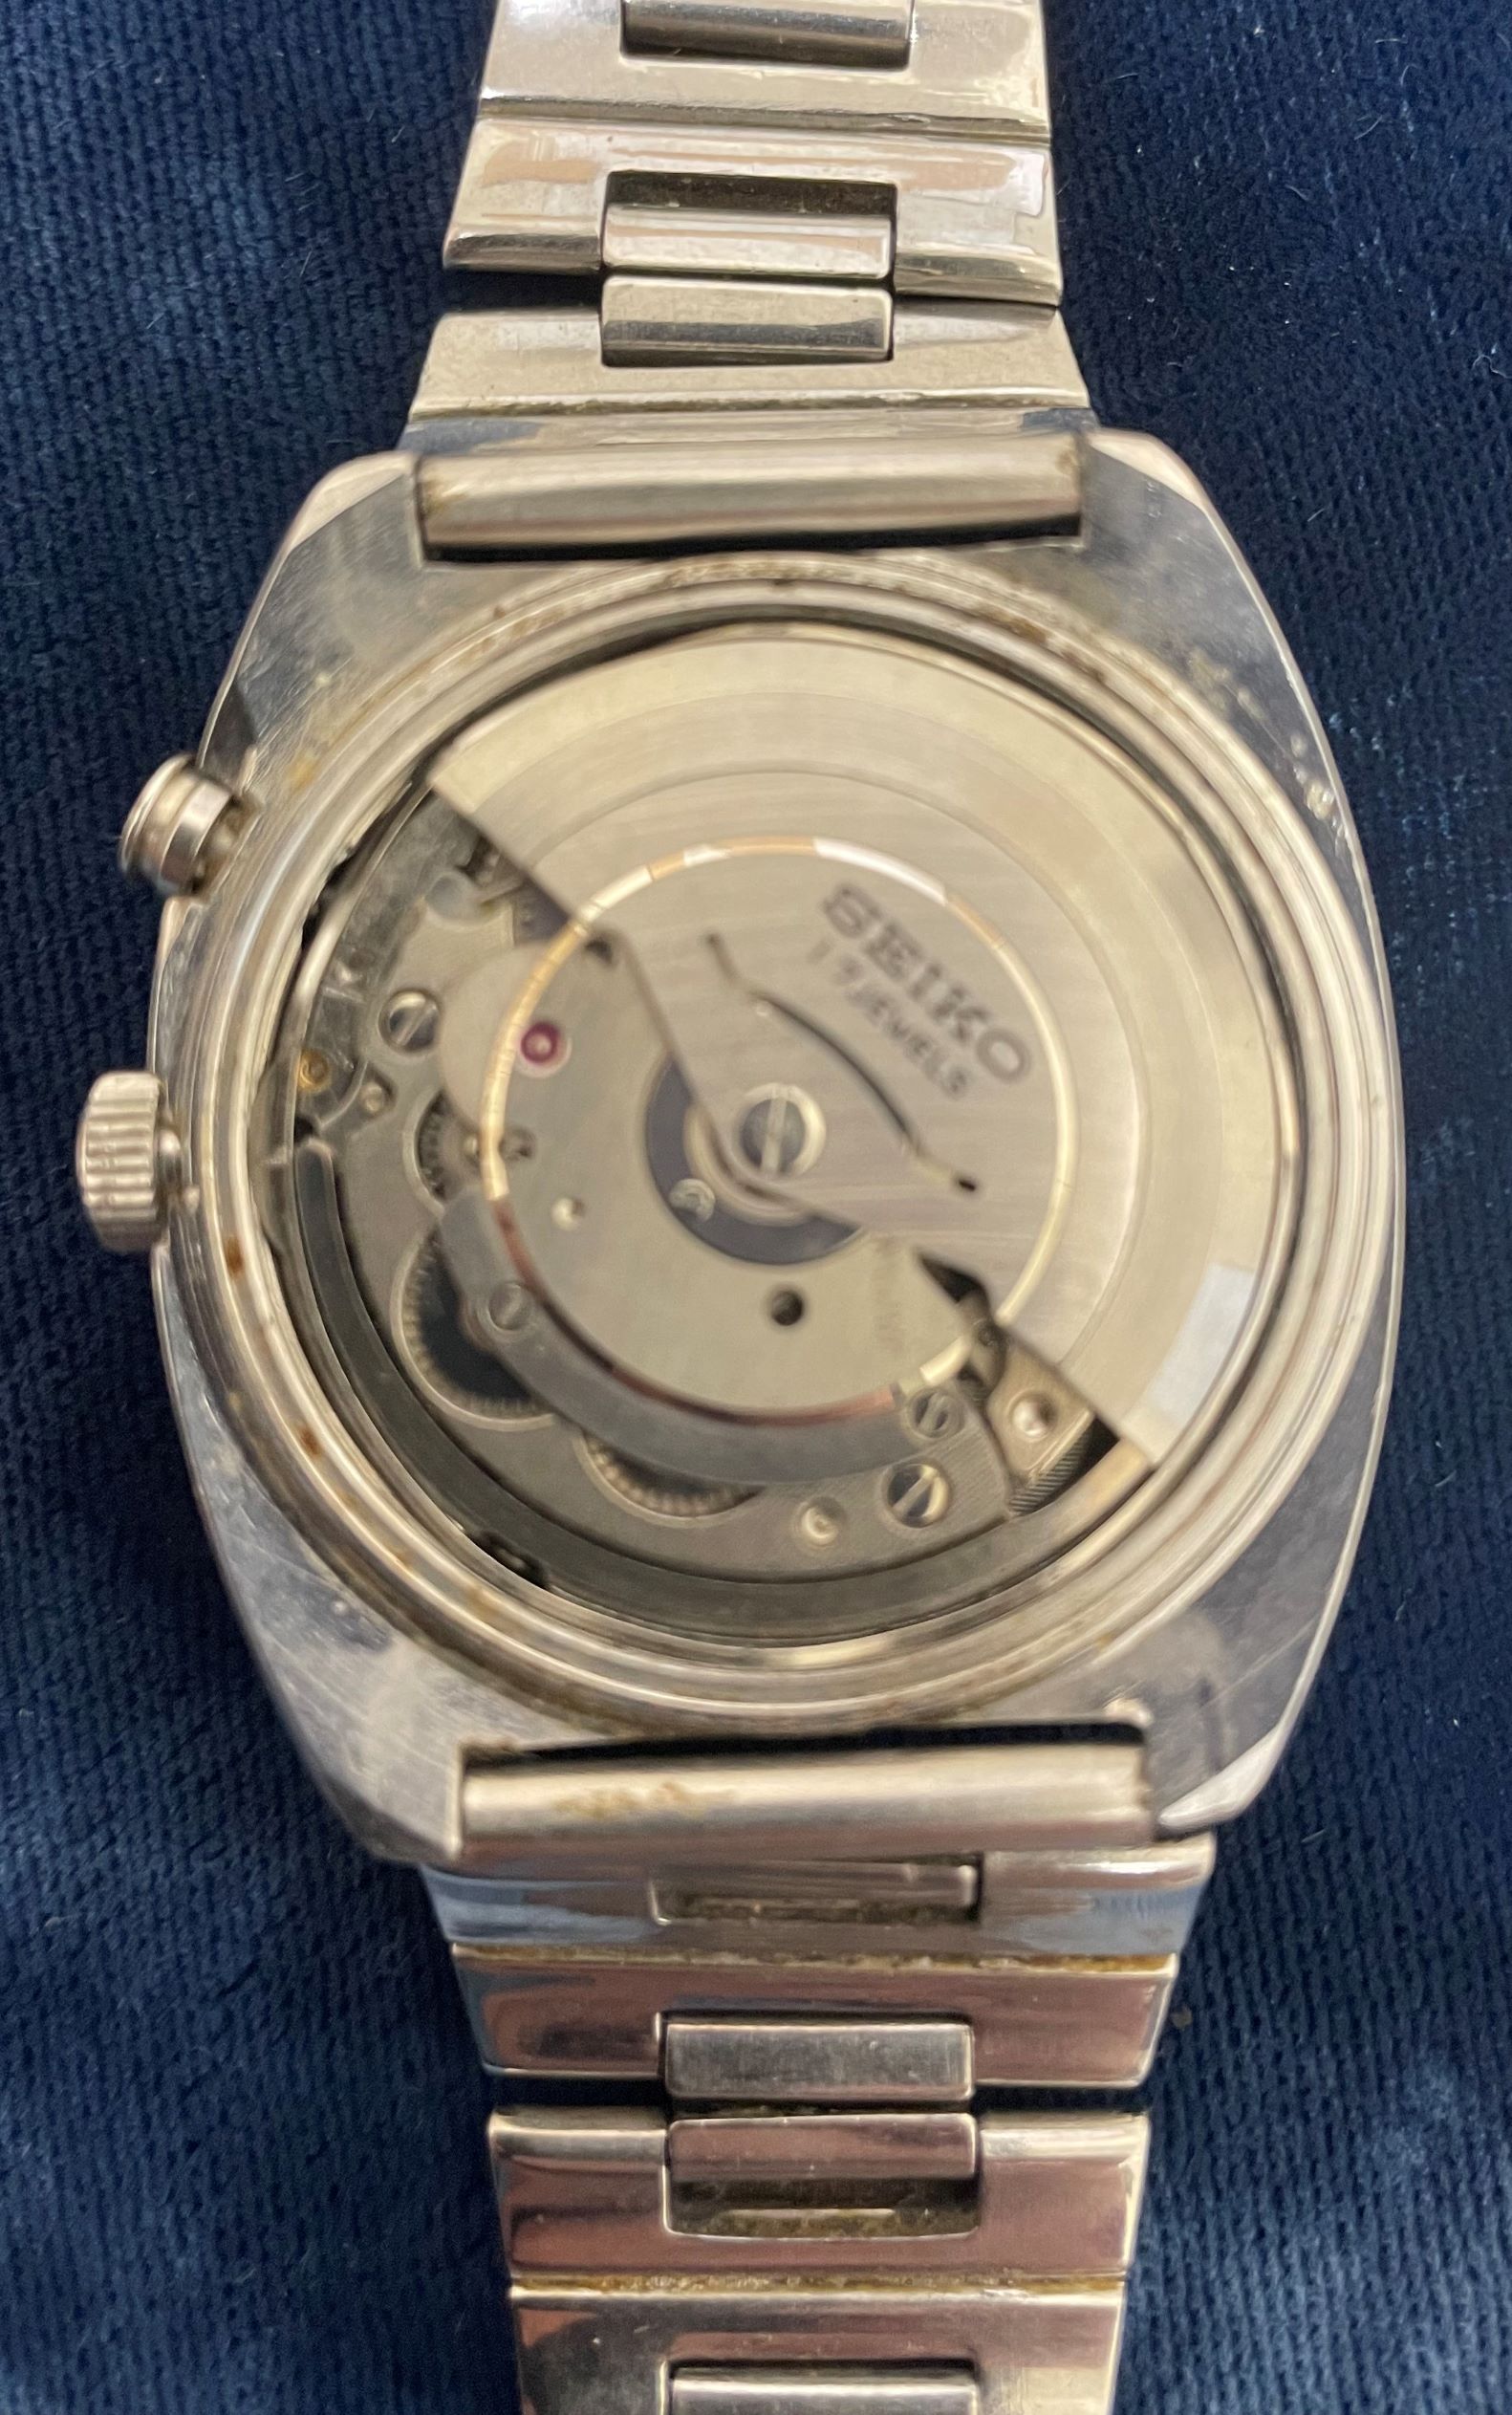 Vintage Seiko Bell-Matic gents alarm wristwatch in a steel case with automatic movement, blue - Image 4 of 5